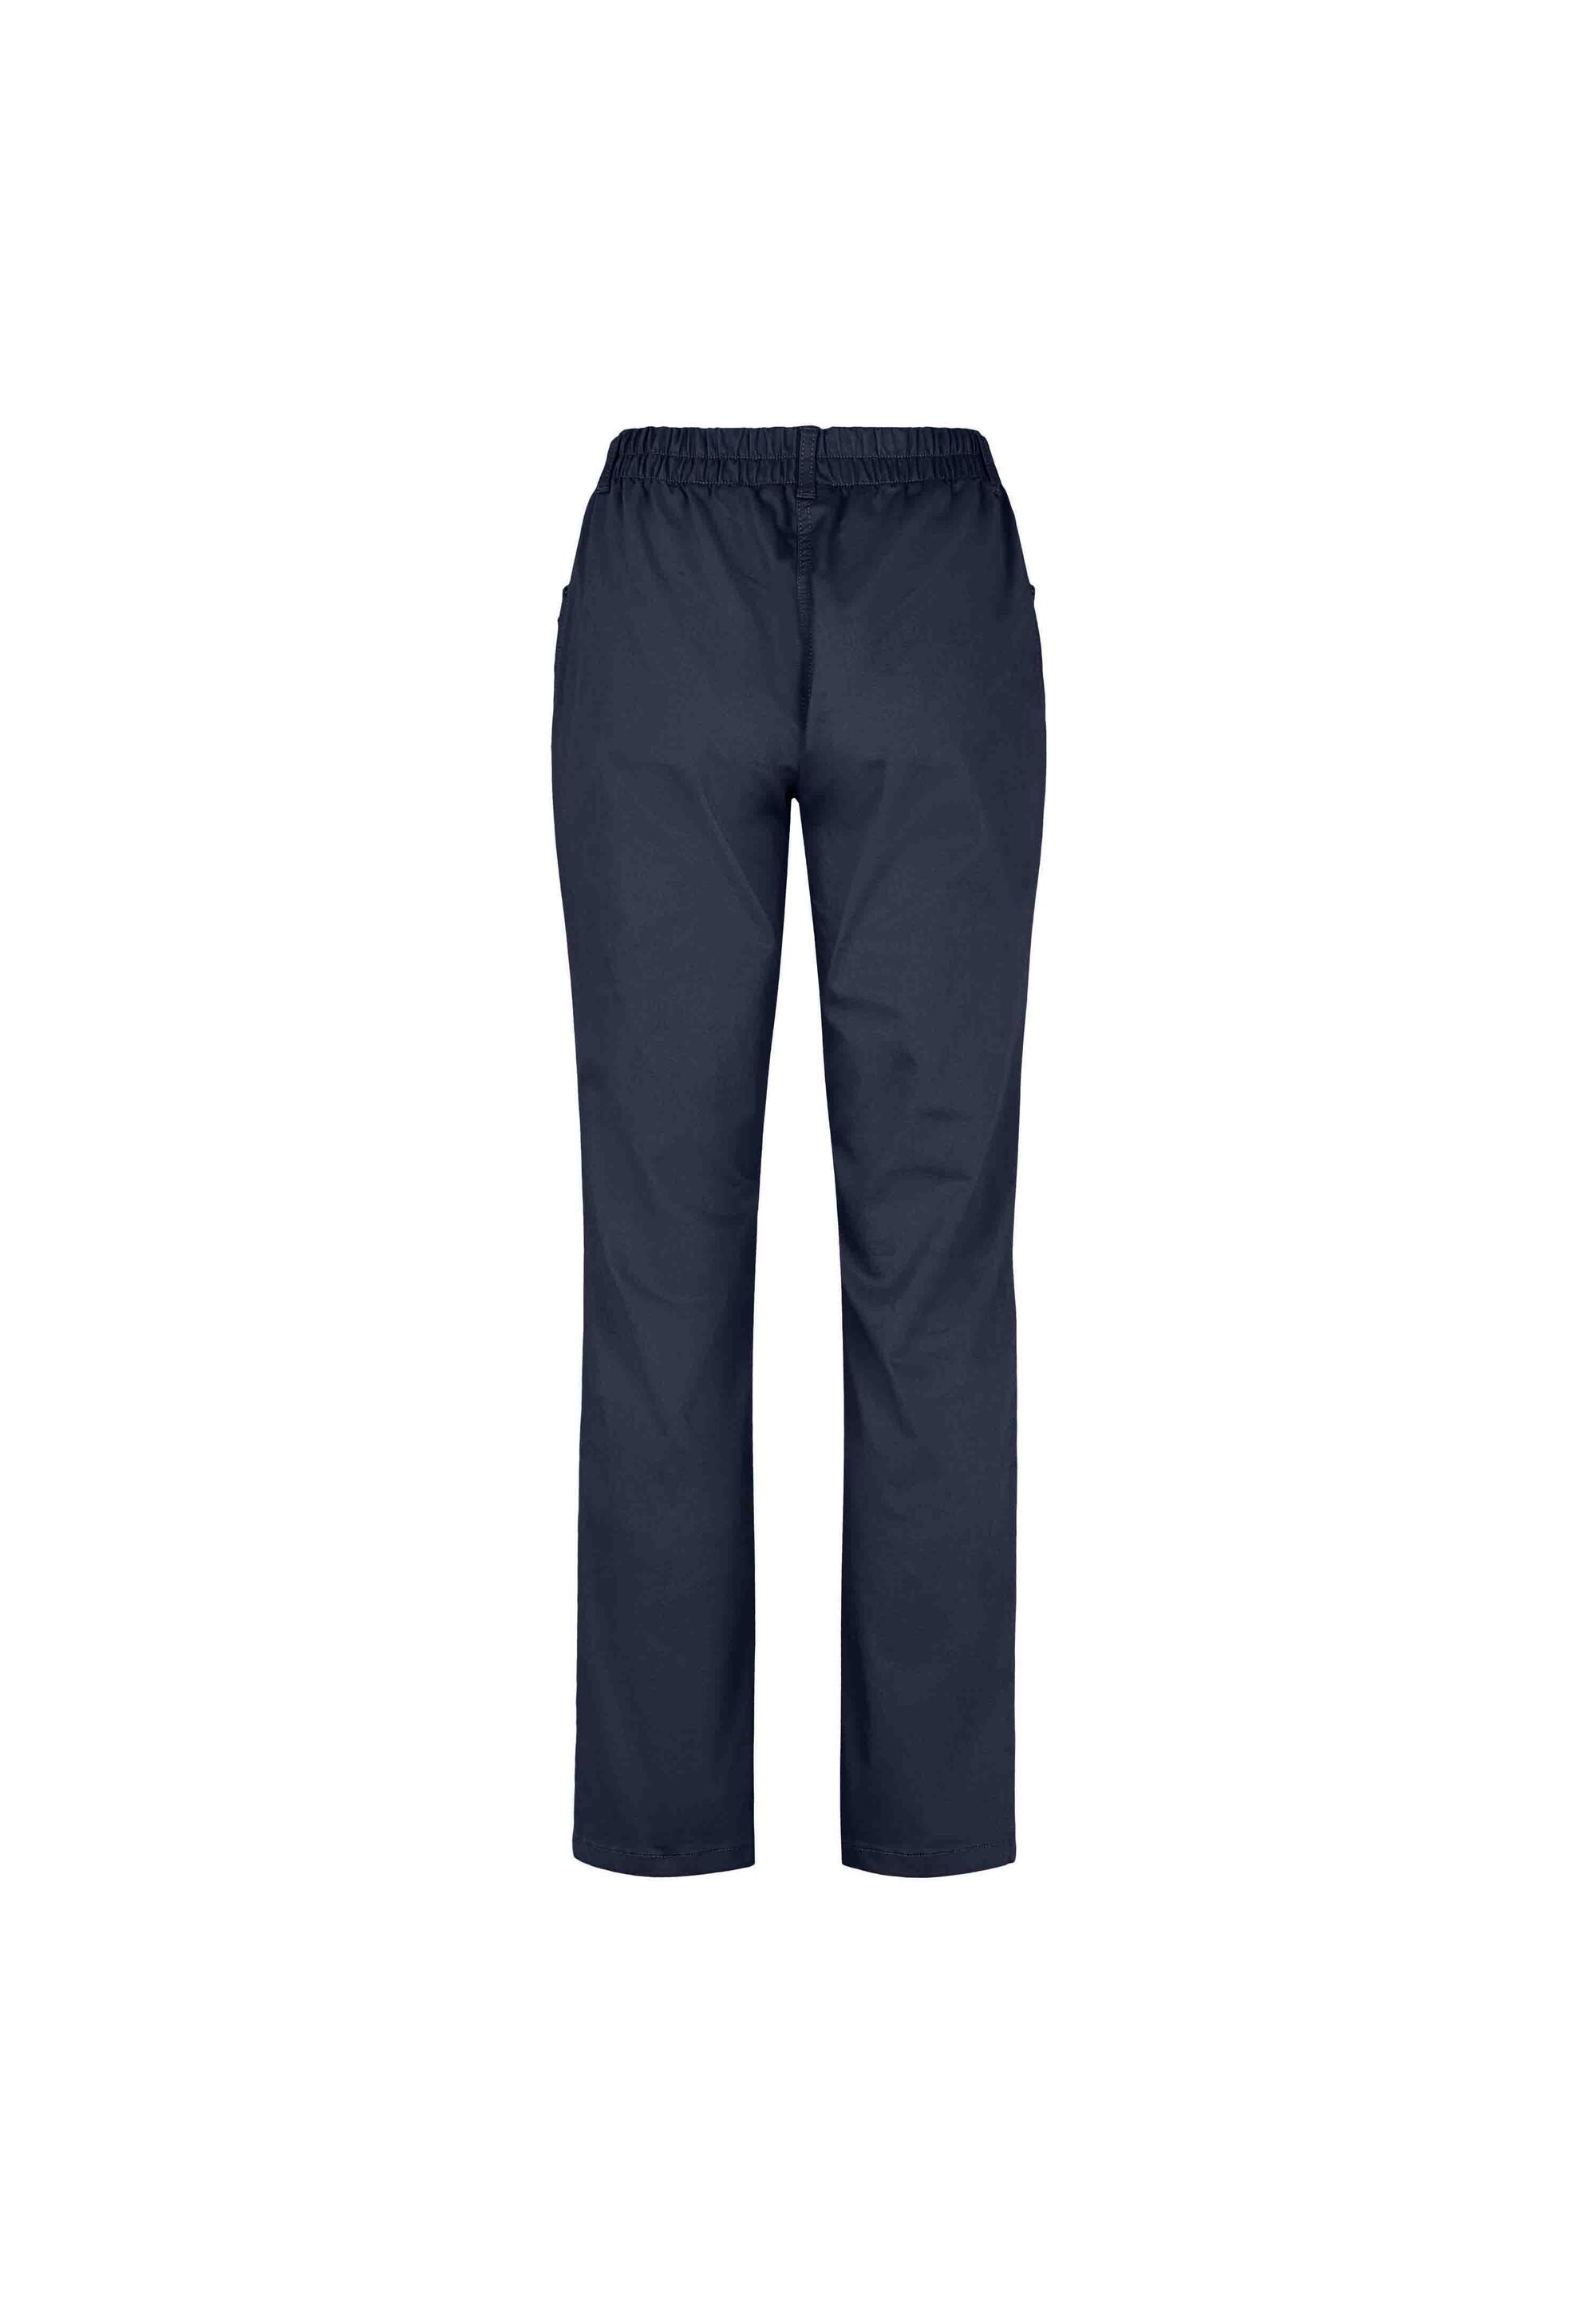 LAURIE  Violet Relaxed - Medium Length Trousers RELAXED Marine